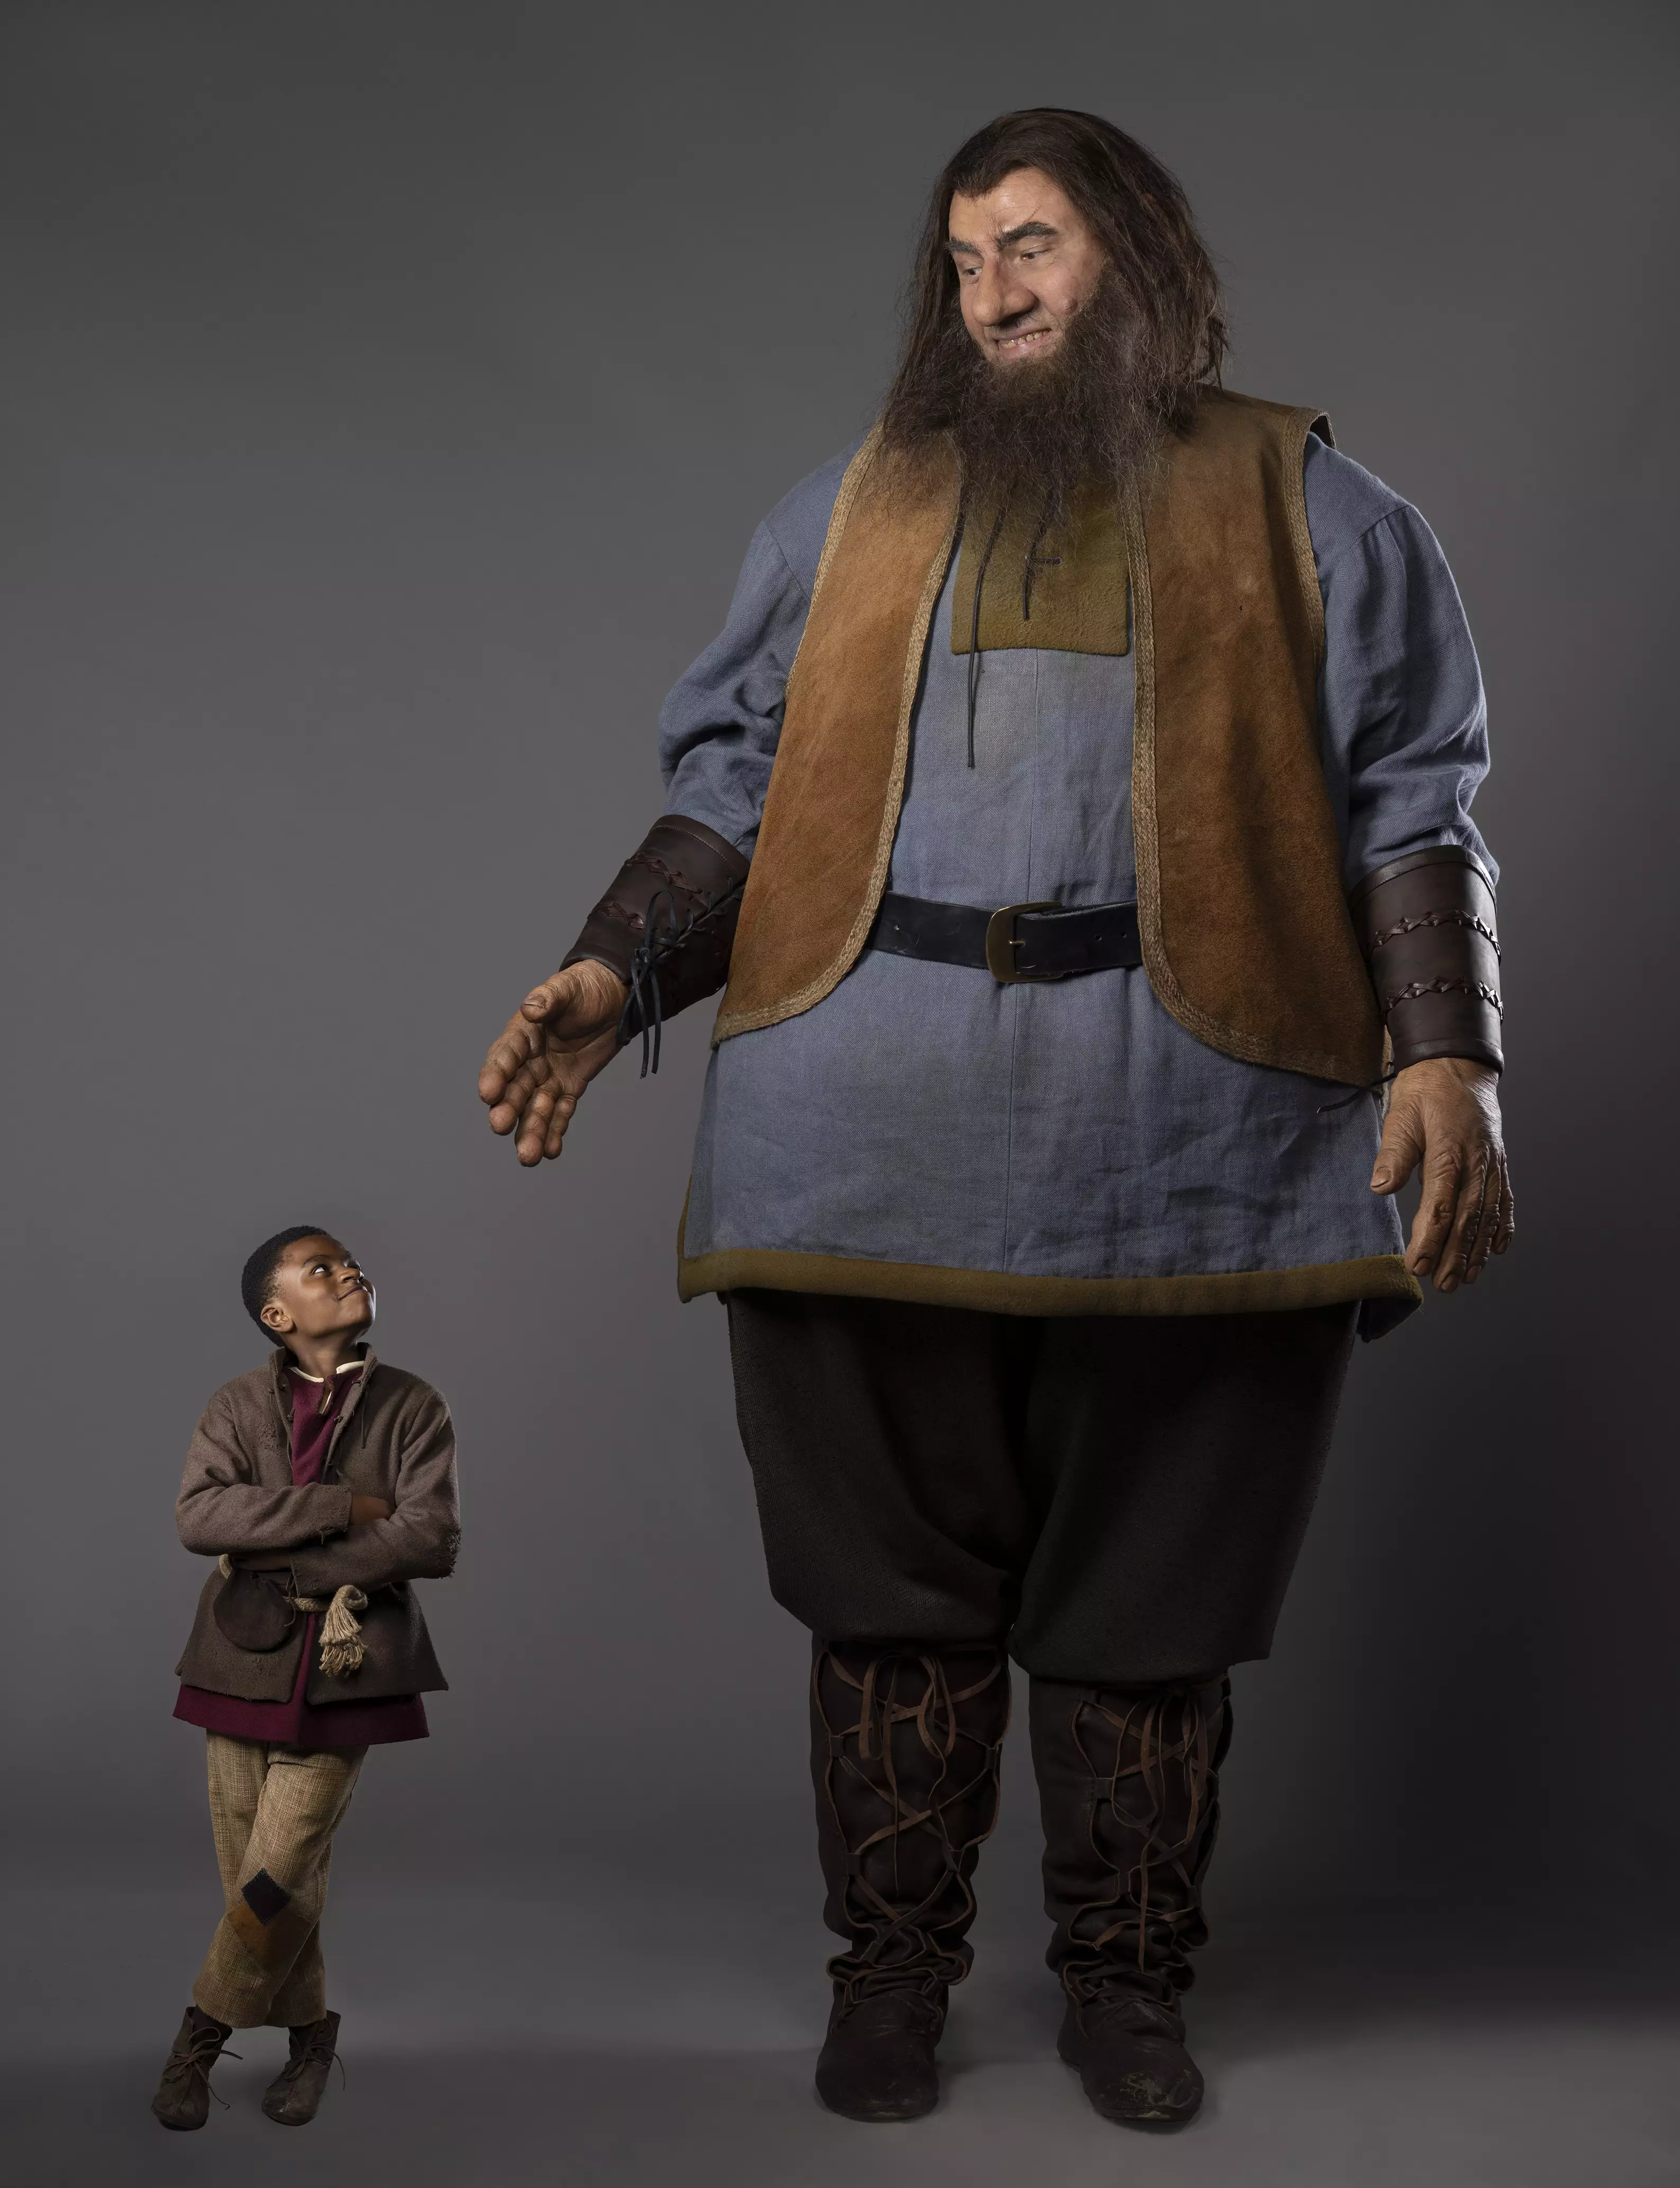 David Walliams dressed up as the giant in Jack and the Beanstalk: After Ever After (